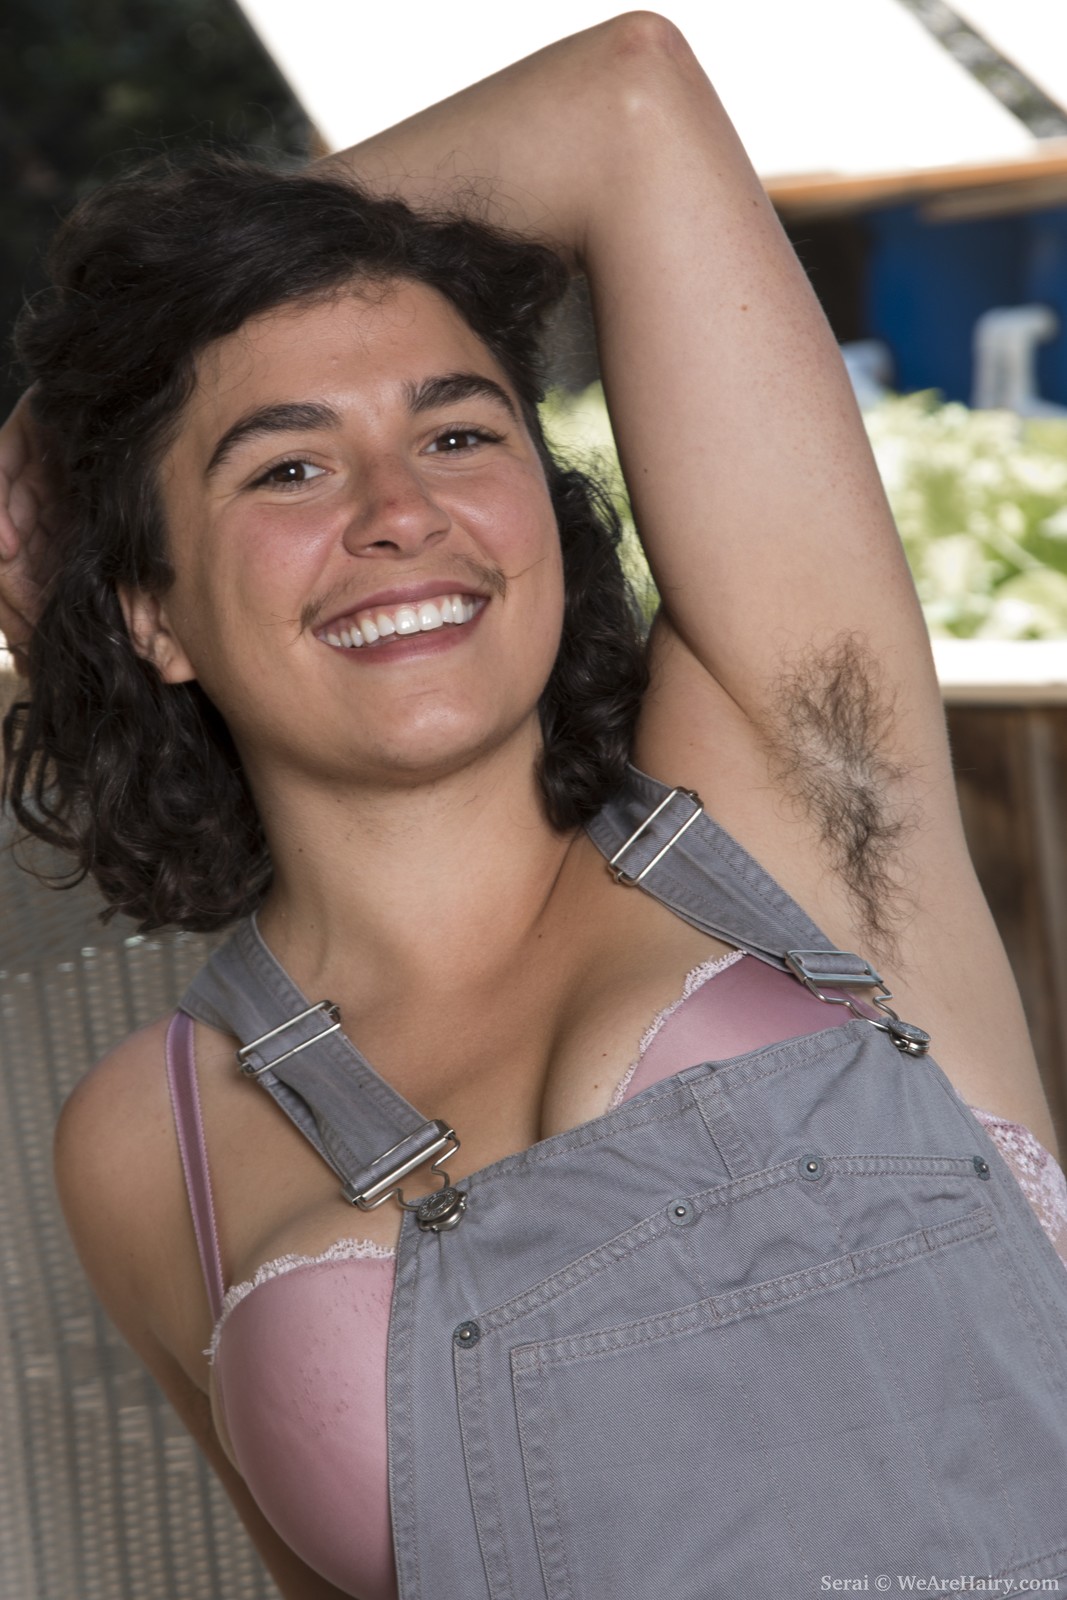 wpid-serai-takes-off-overalls-outdoors-and-gets-naked2.jpg